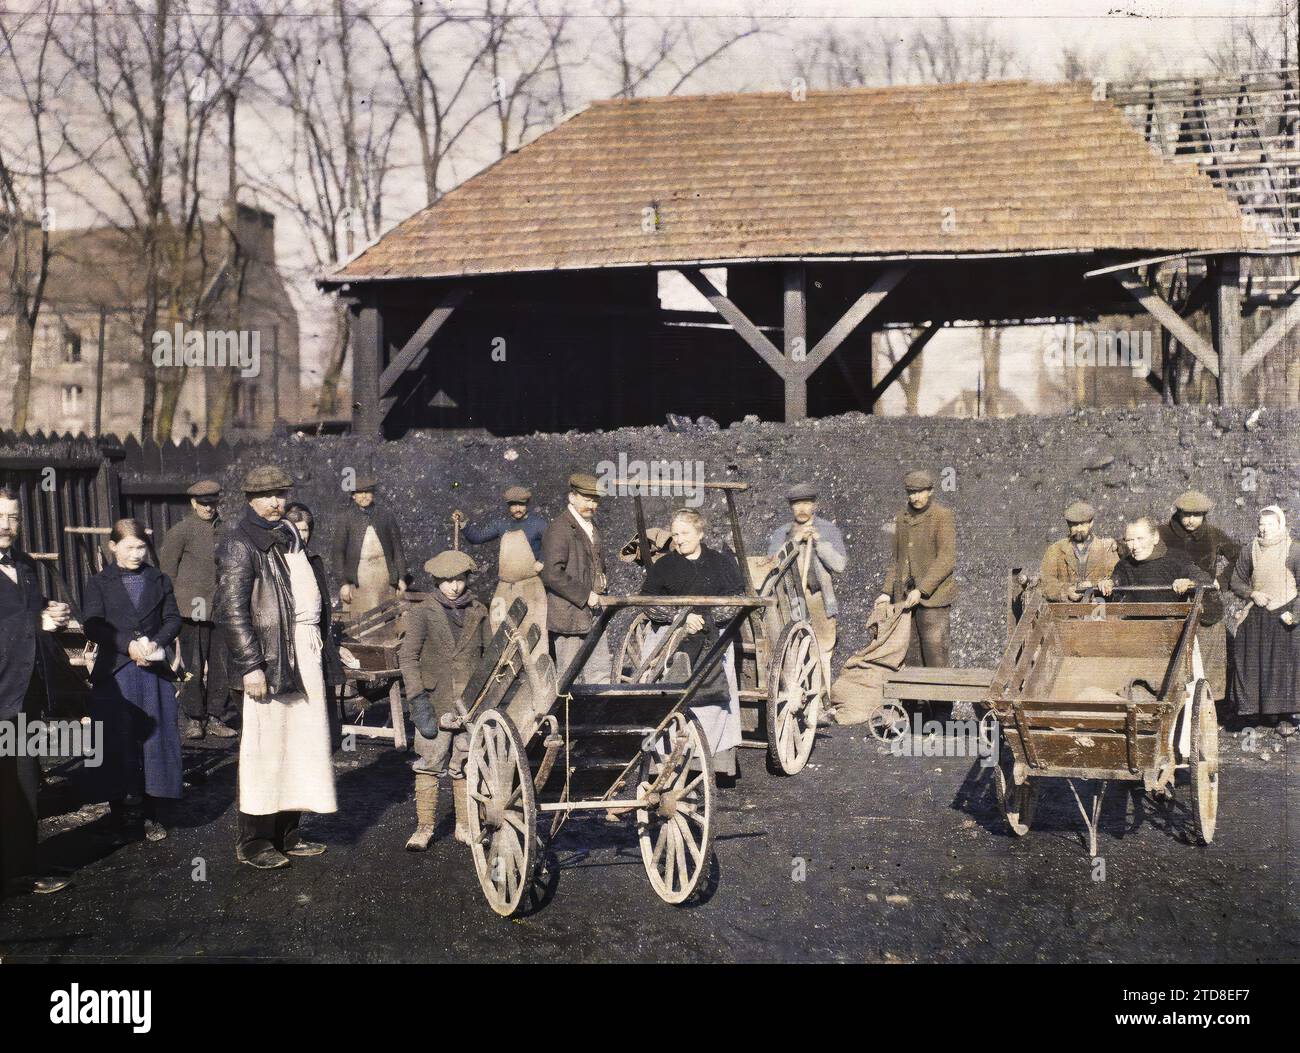 Reims, Marne, Champagne, France Coal distribution, Transport, First World War, Hand transport, Cart, Rear, Shortages, rationing, France, Reims, Coal distribution, Reims, 28/03/1917 - 28/03/1917, Castelnau, Paul, 1917 - Marne - Fernand Cuville (Photographic section of the army), Autochrome, photo, Glass, Autochrome, photo, Positive, Horizontal, Size 9 x 12 cm Stock Photo